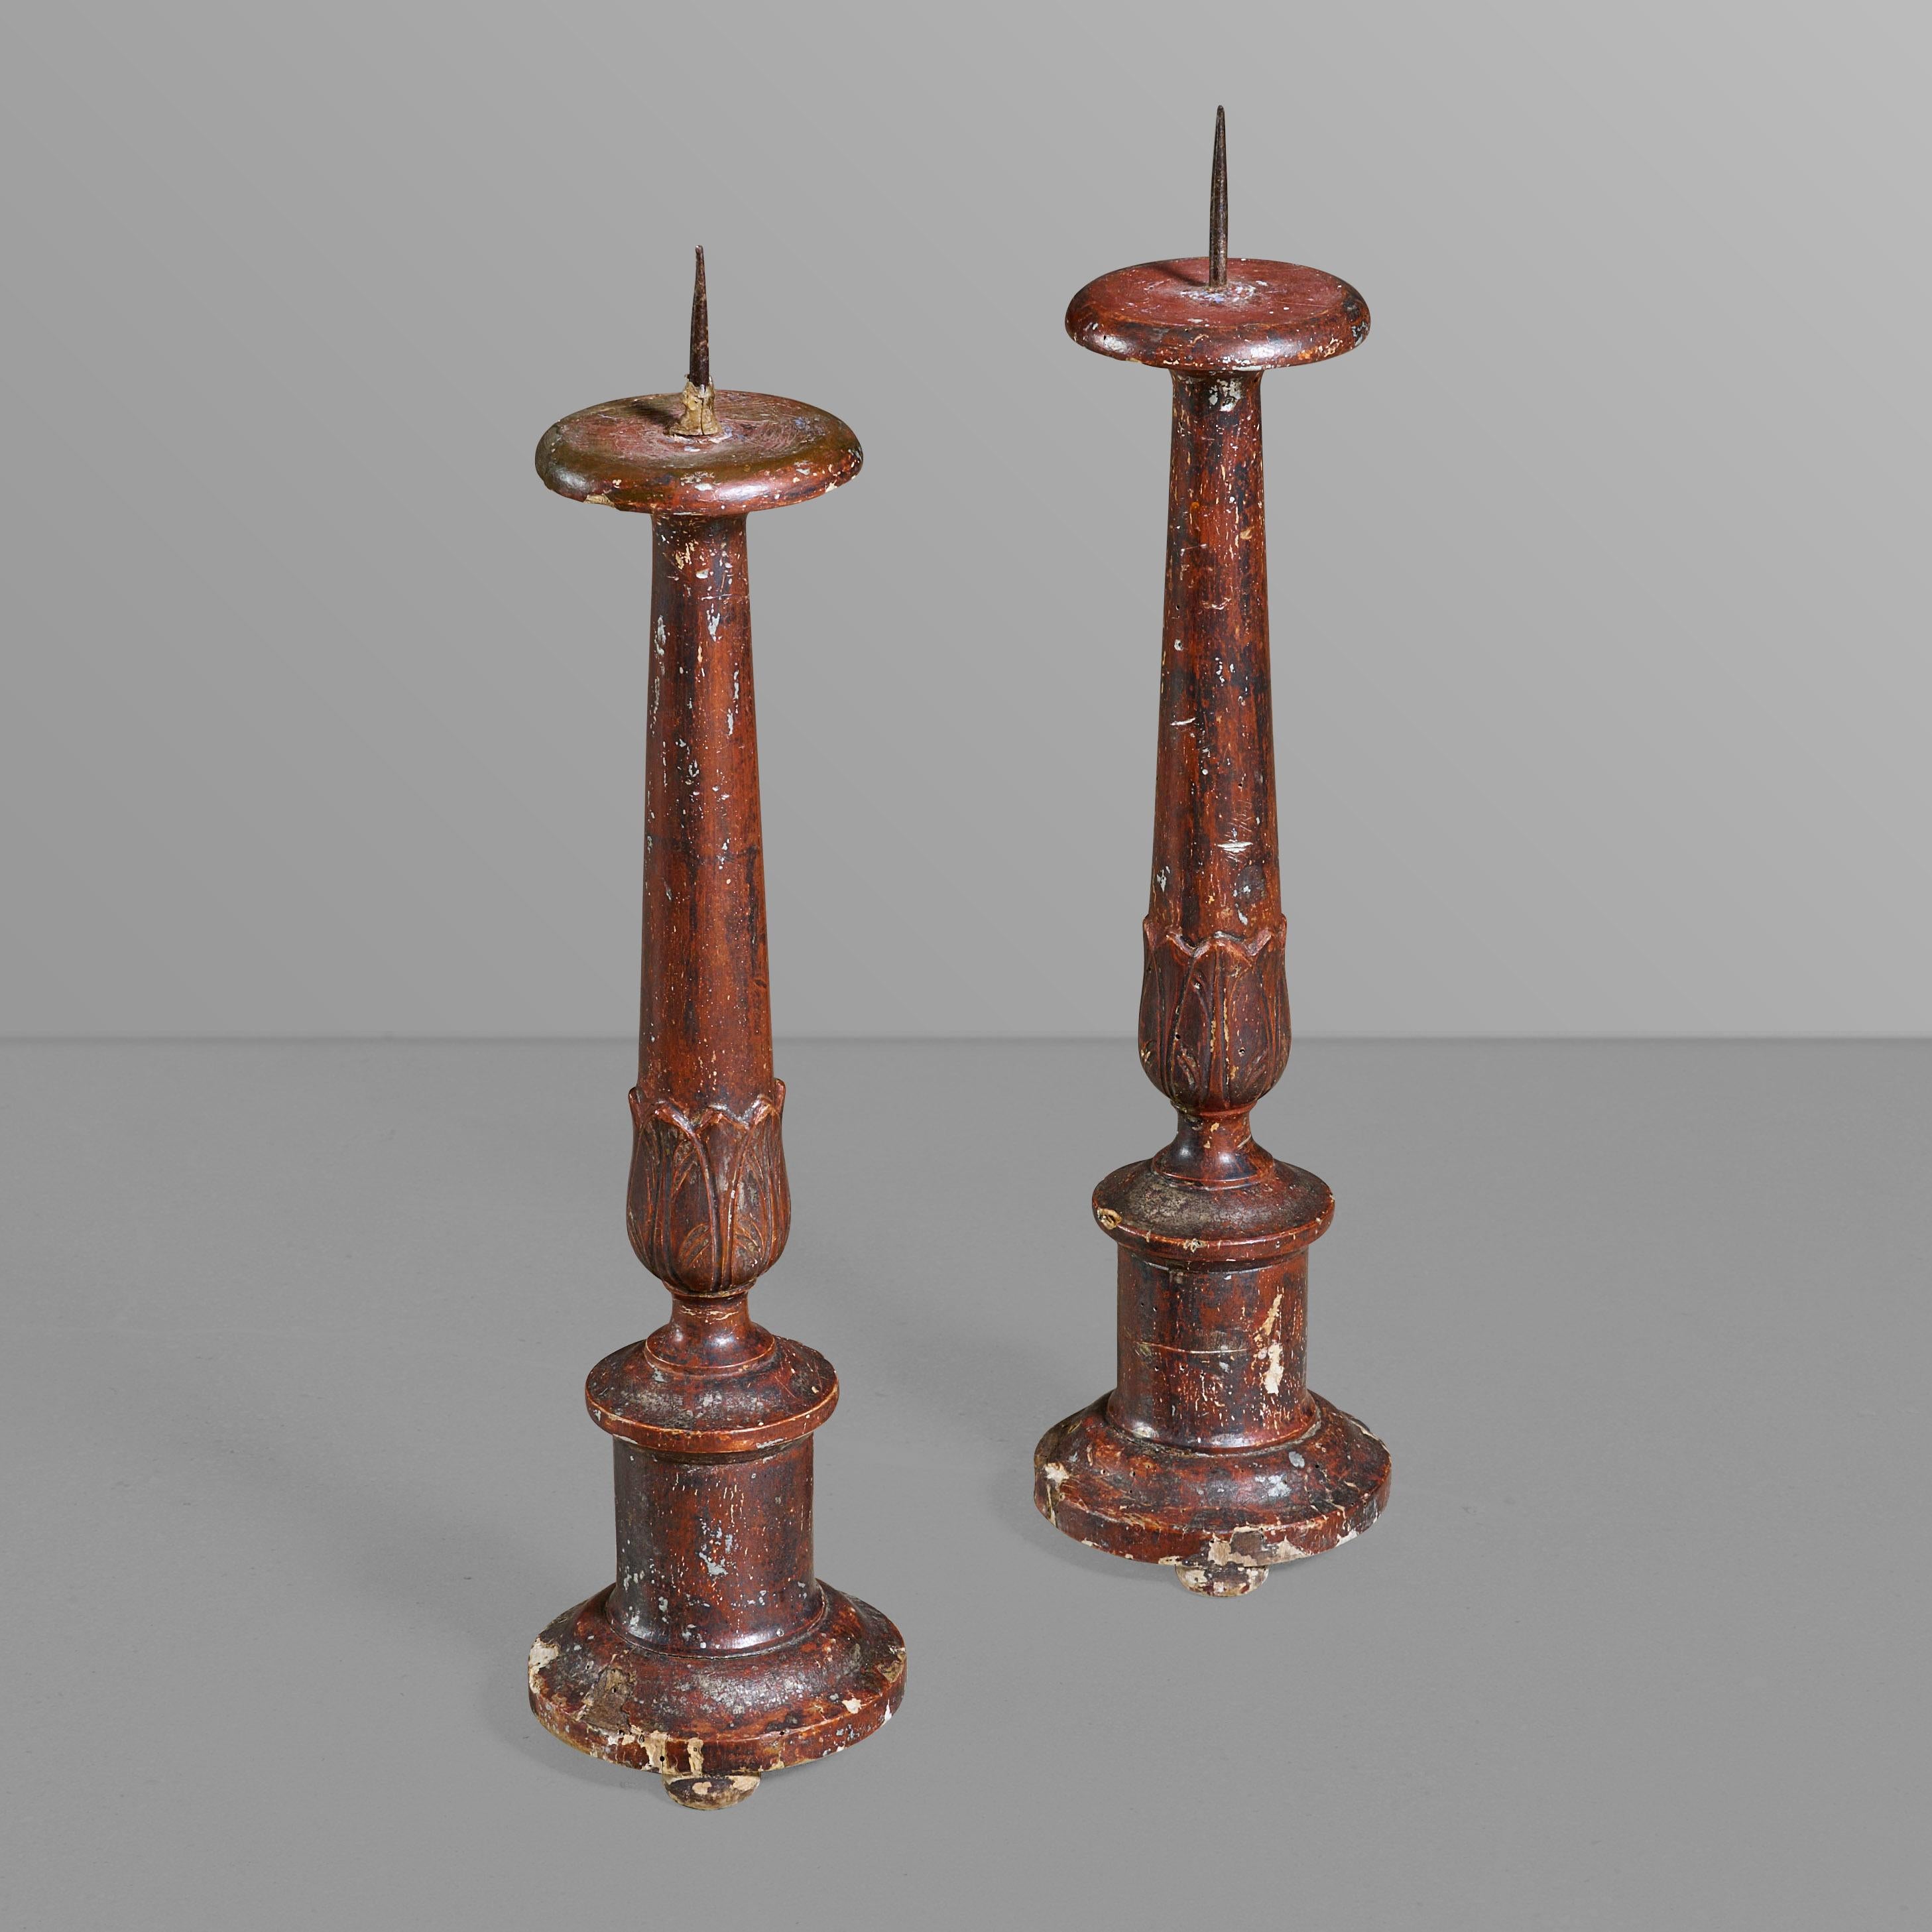 Italian Pair of 18th Century Candle Sticks For Sale